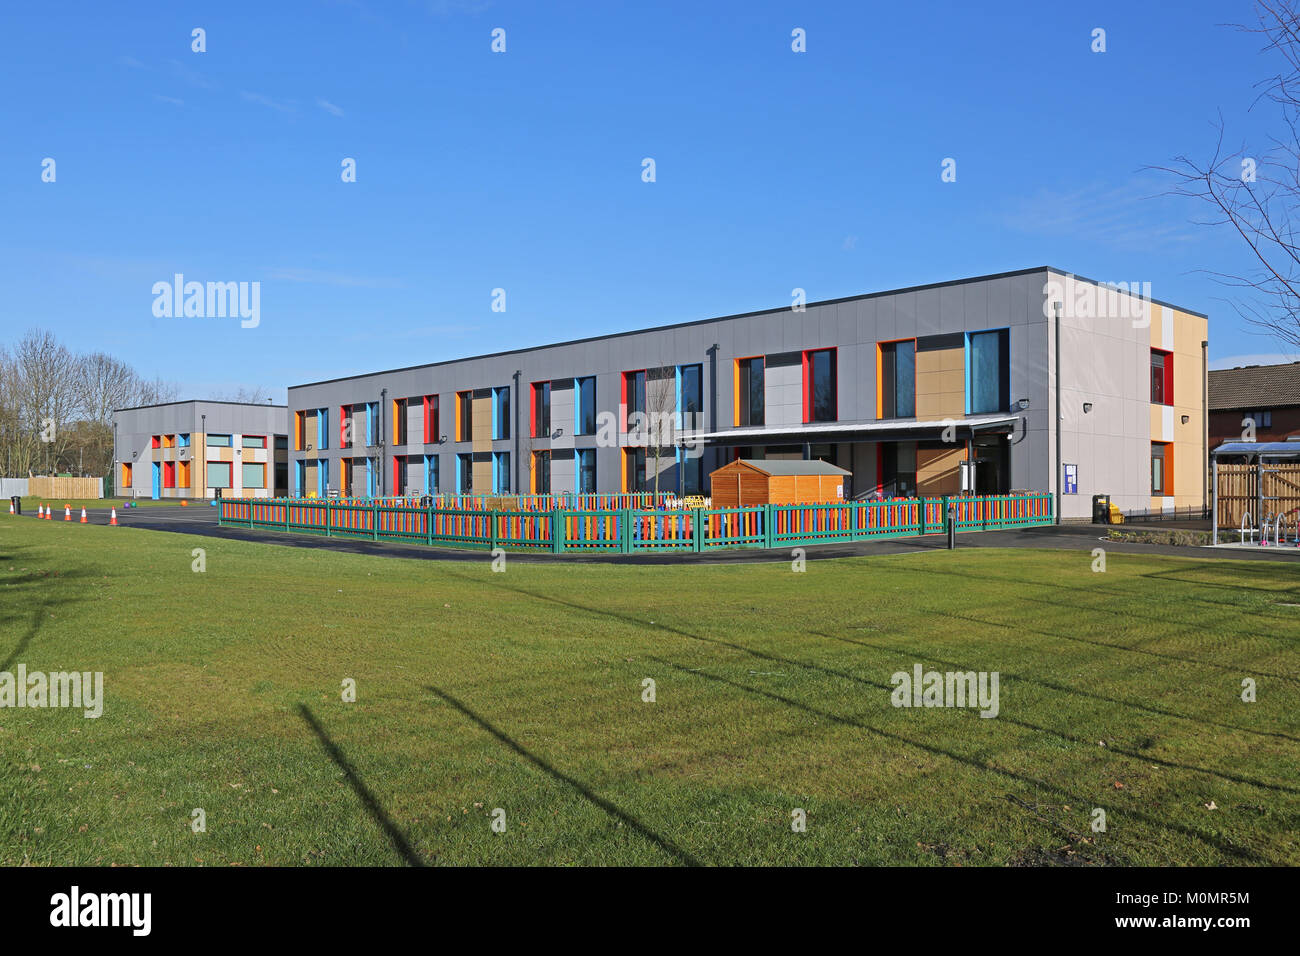 A brand new primary school in Edgware, north London, UK. Clad with architectural cladding panels featuring brightly coloured window reveals. Stock Photo